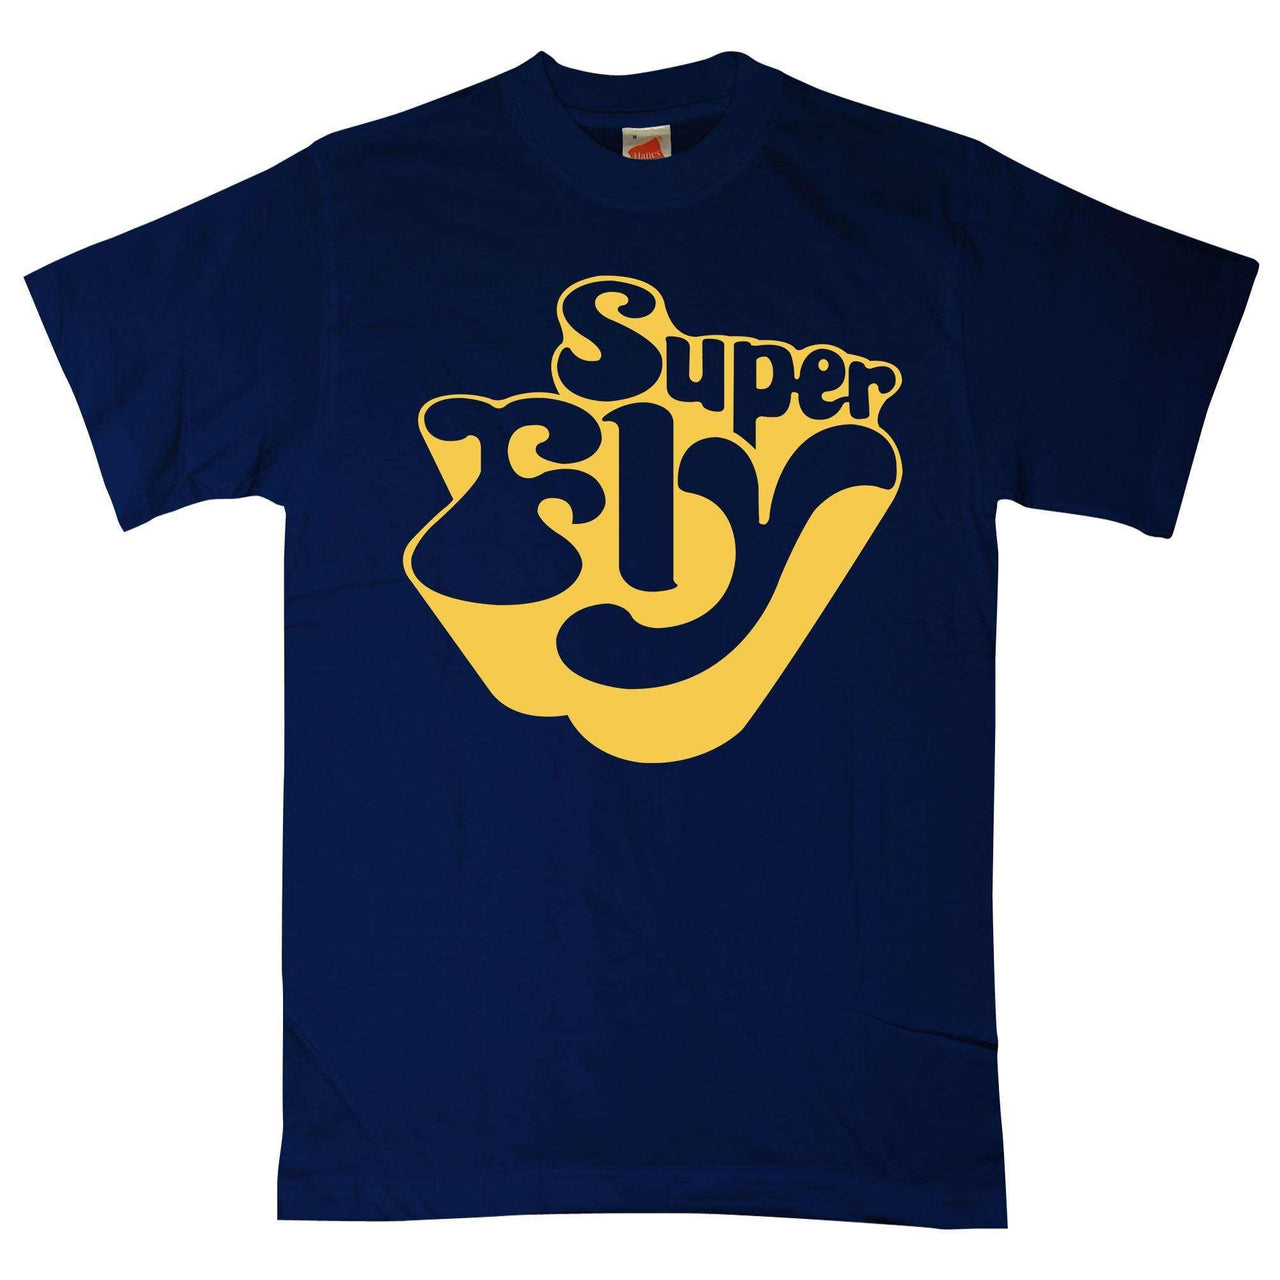 Superfly Unisex T-Shirt For Men And Women 8Ball